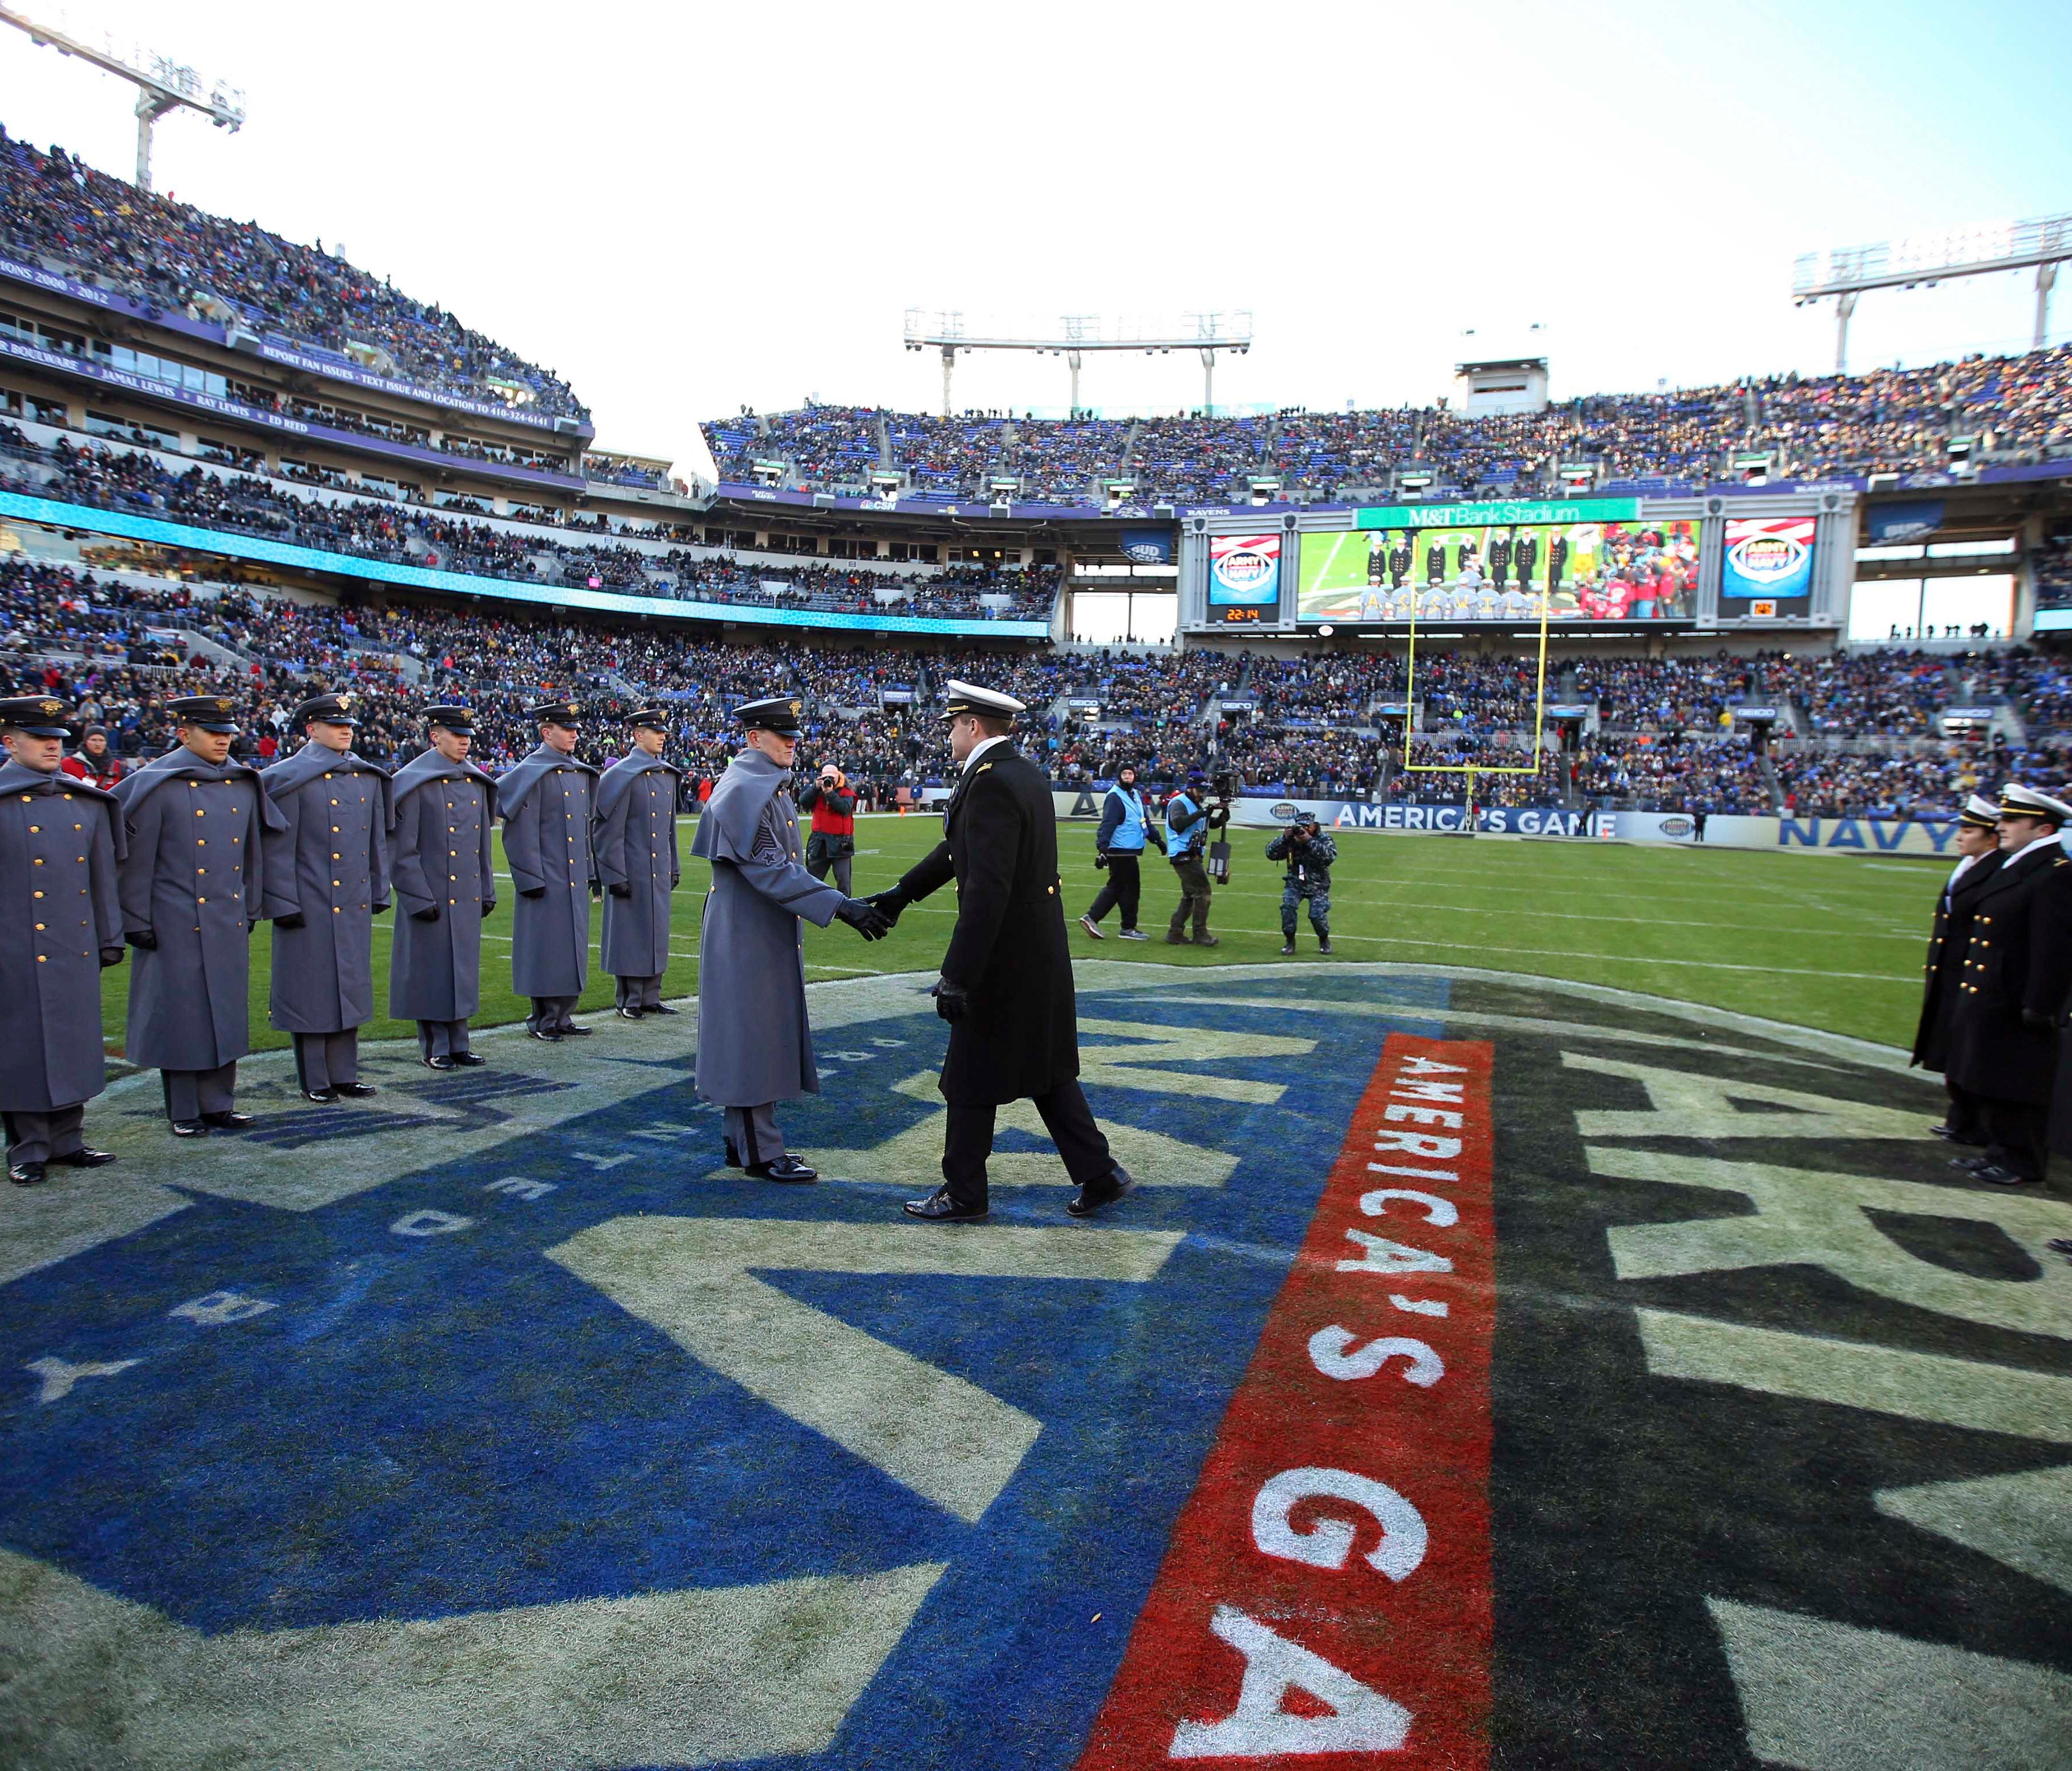 Cadets from West Point and Midshipmen from the Naval Academy participate in a ceremony before the 117th Army-Navy game in 2016.